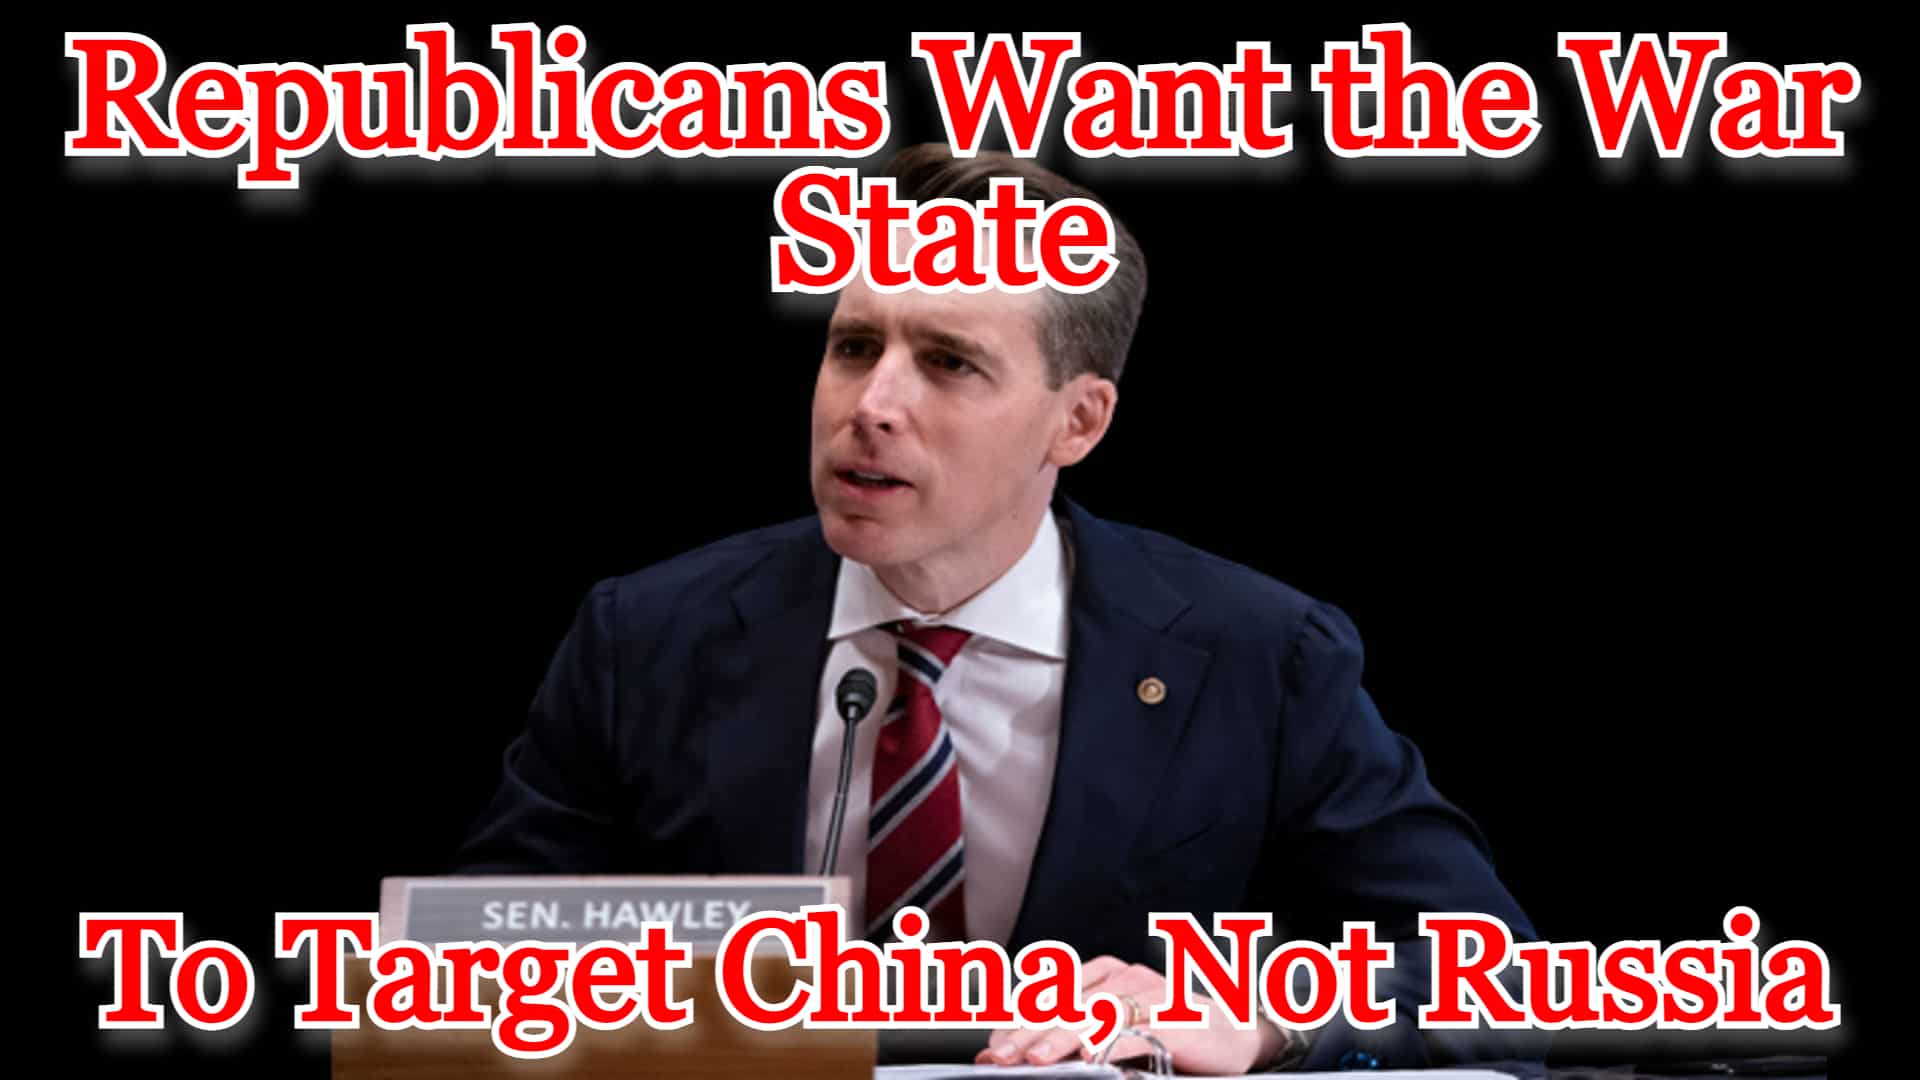 COI #359: Republicans Want the War State to Target China, Not Russia